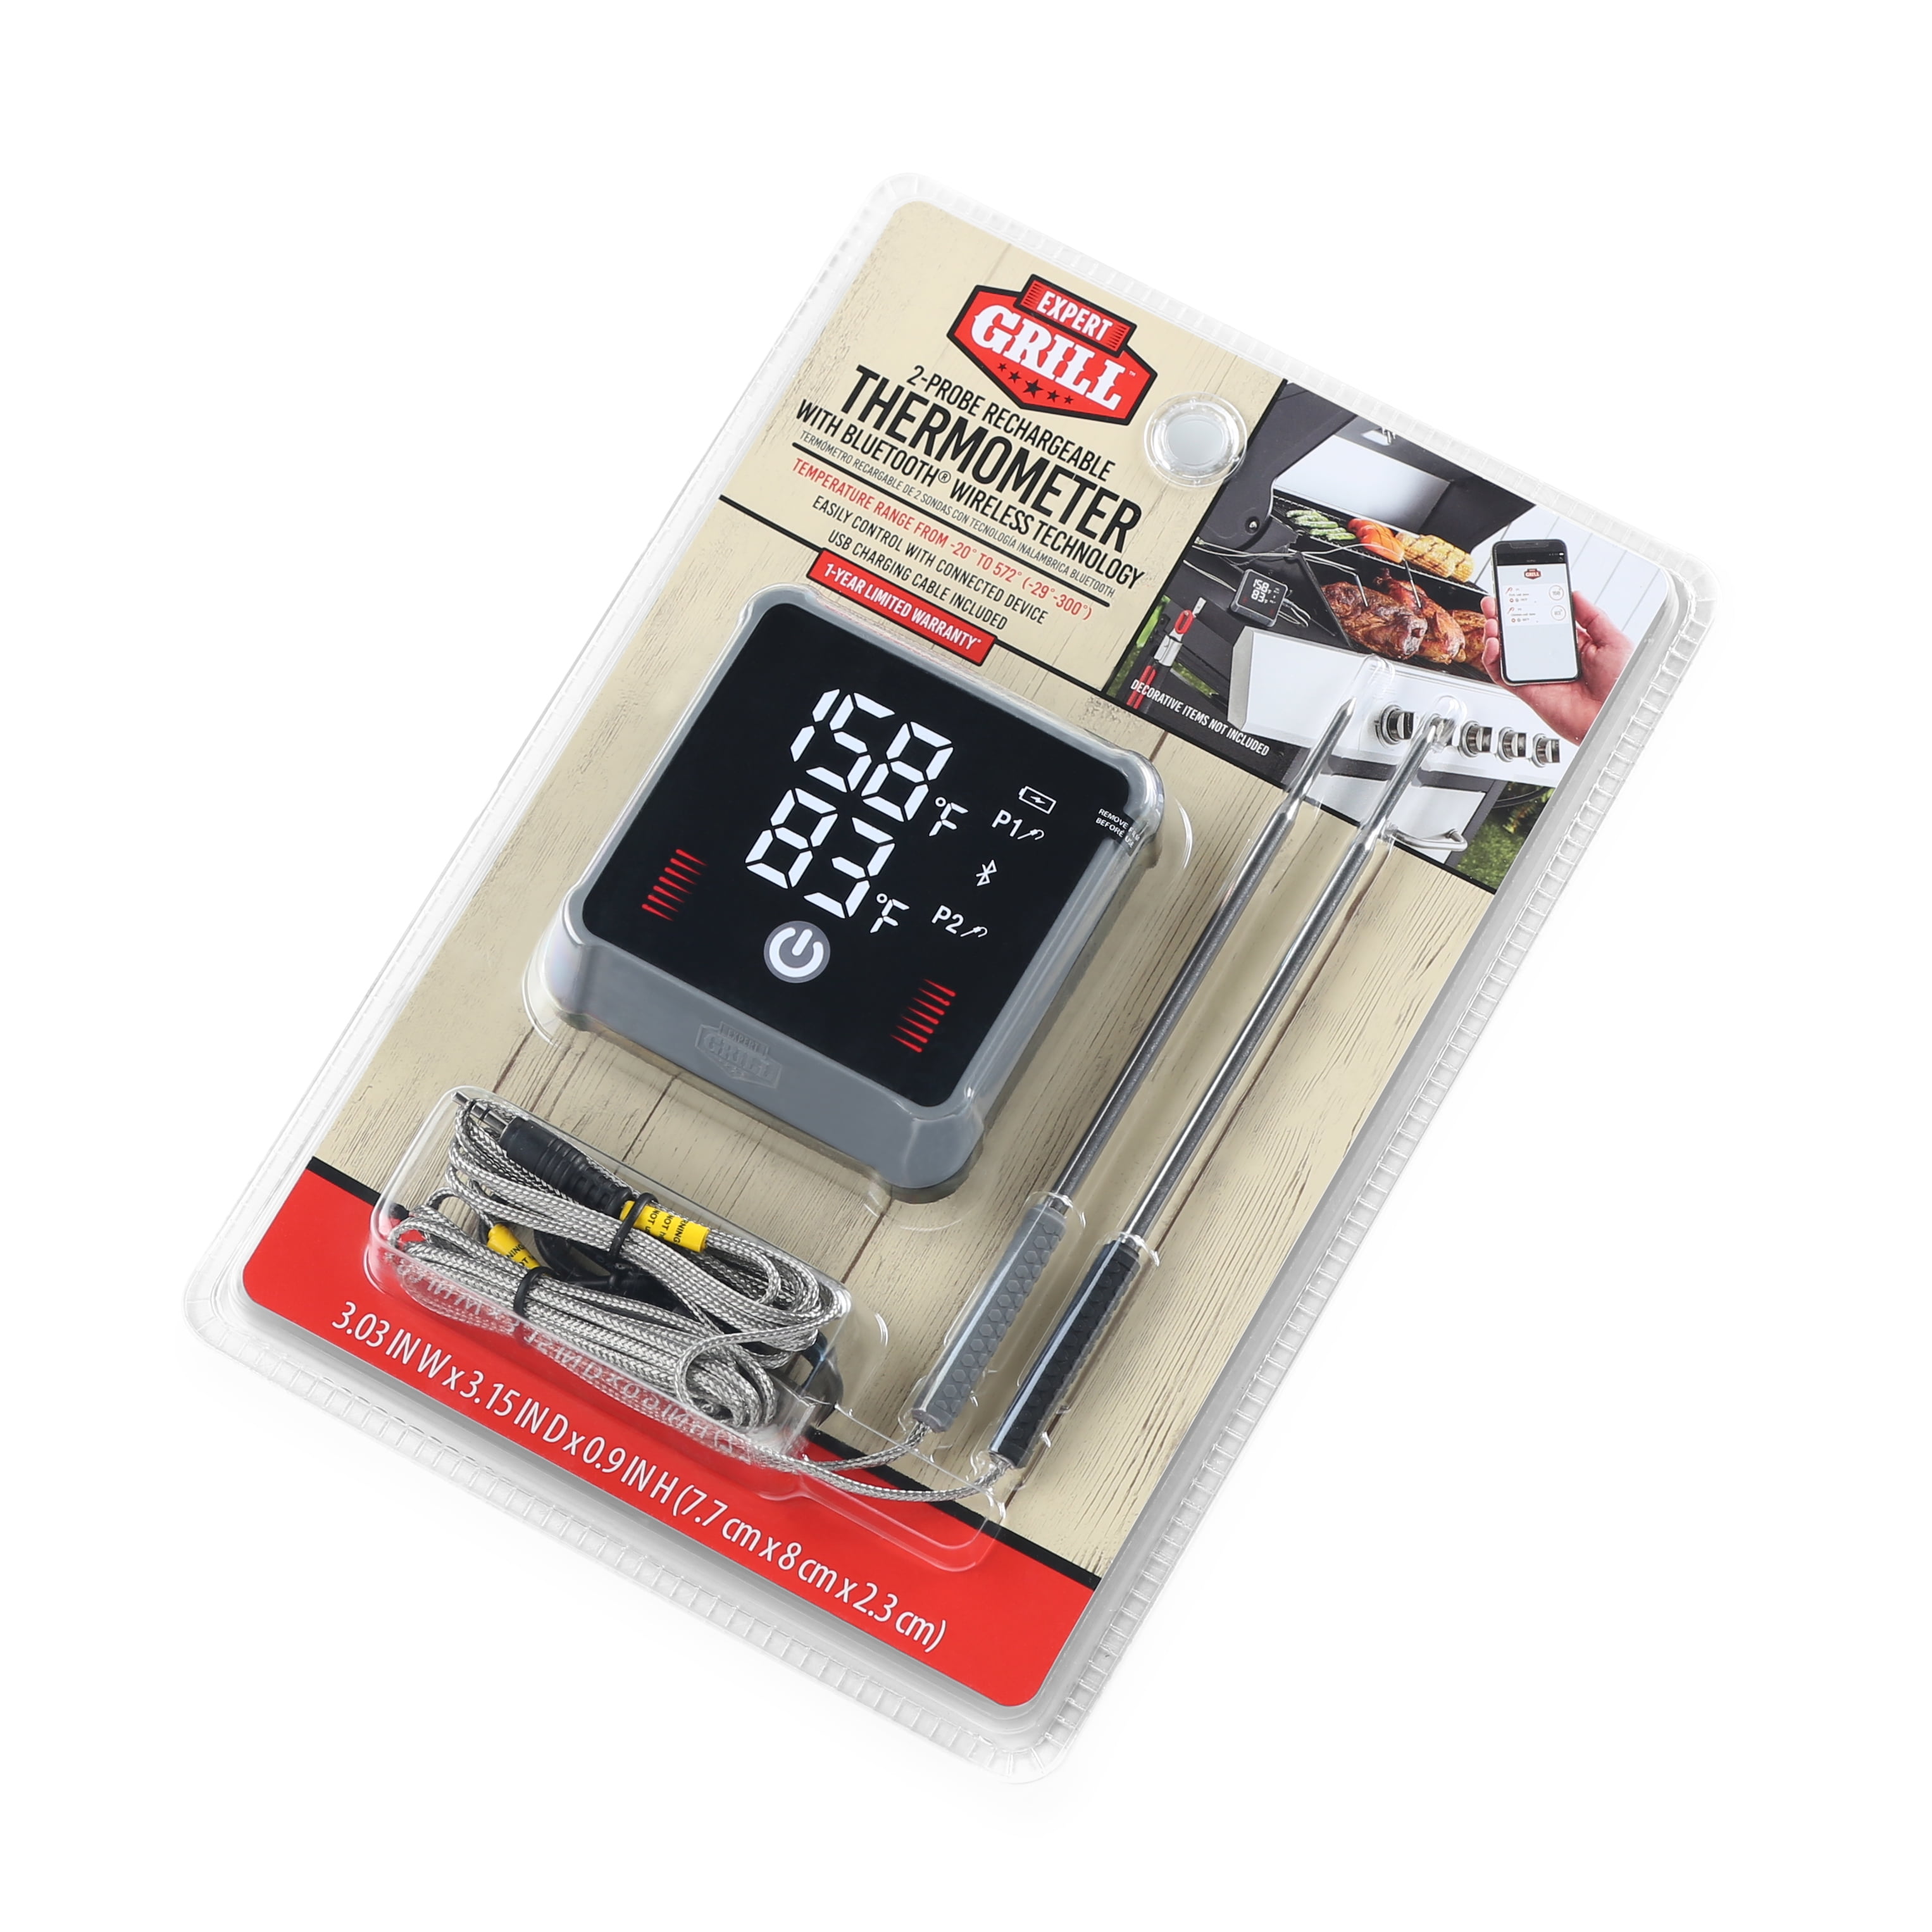 Expert Grill Four Probes Waterproof BBQ Grilling Thermometer